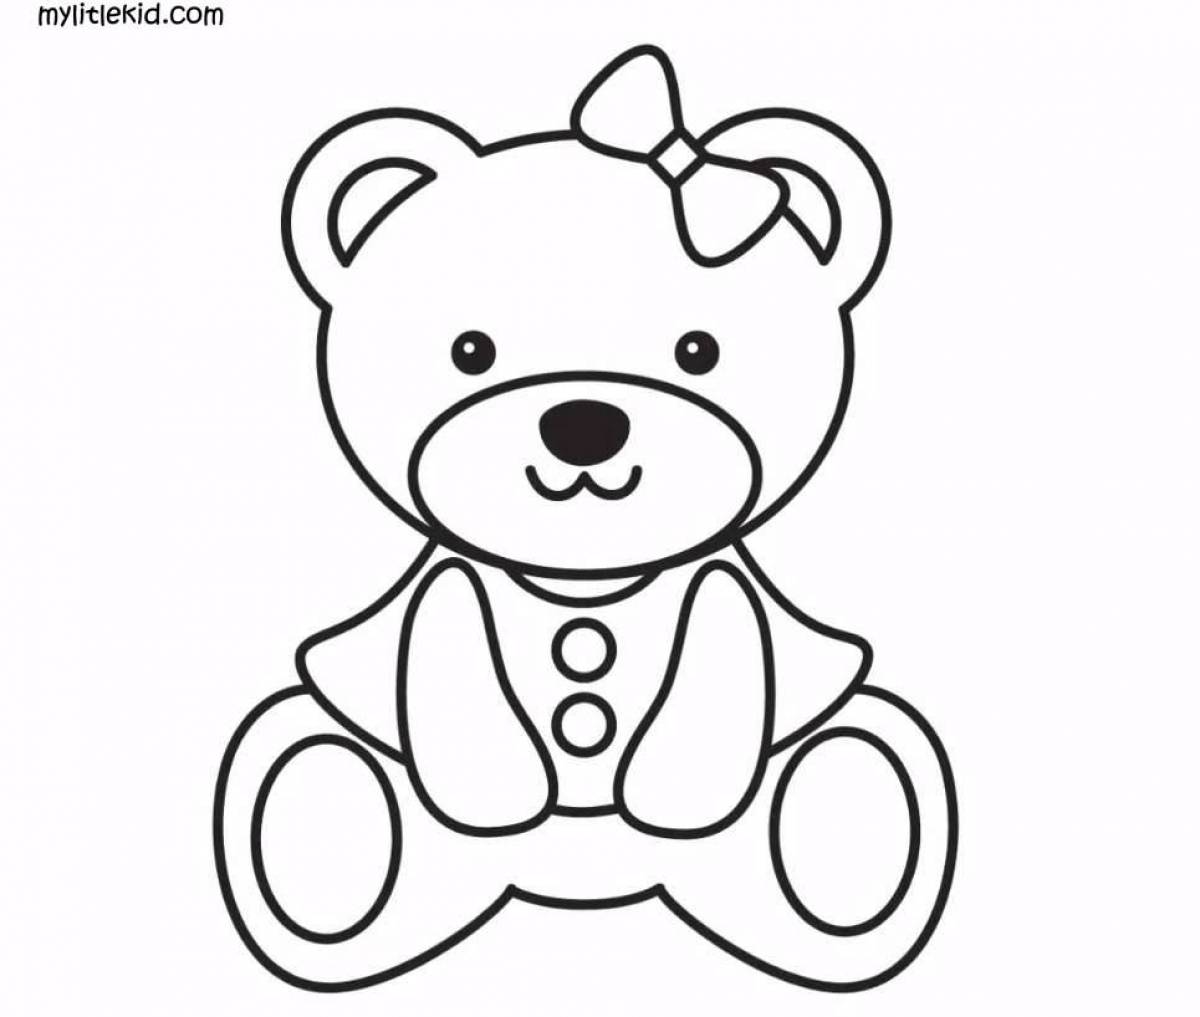 Cute teddy bear coloring book for 3-4 year olds